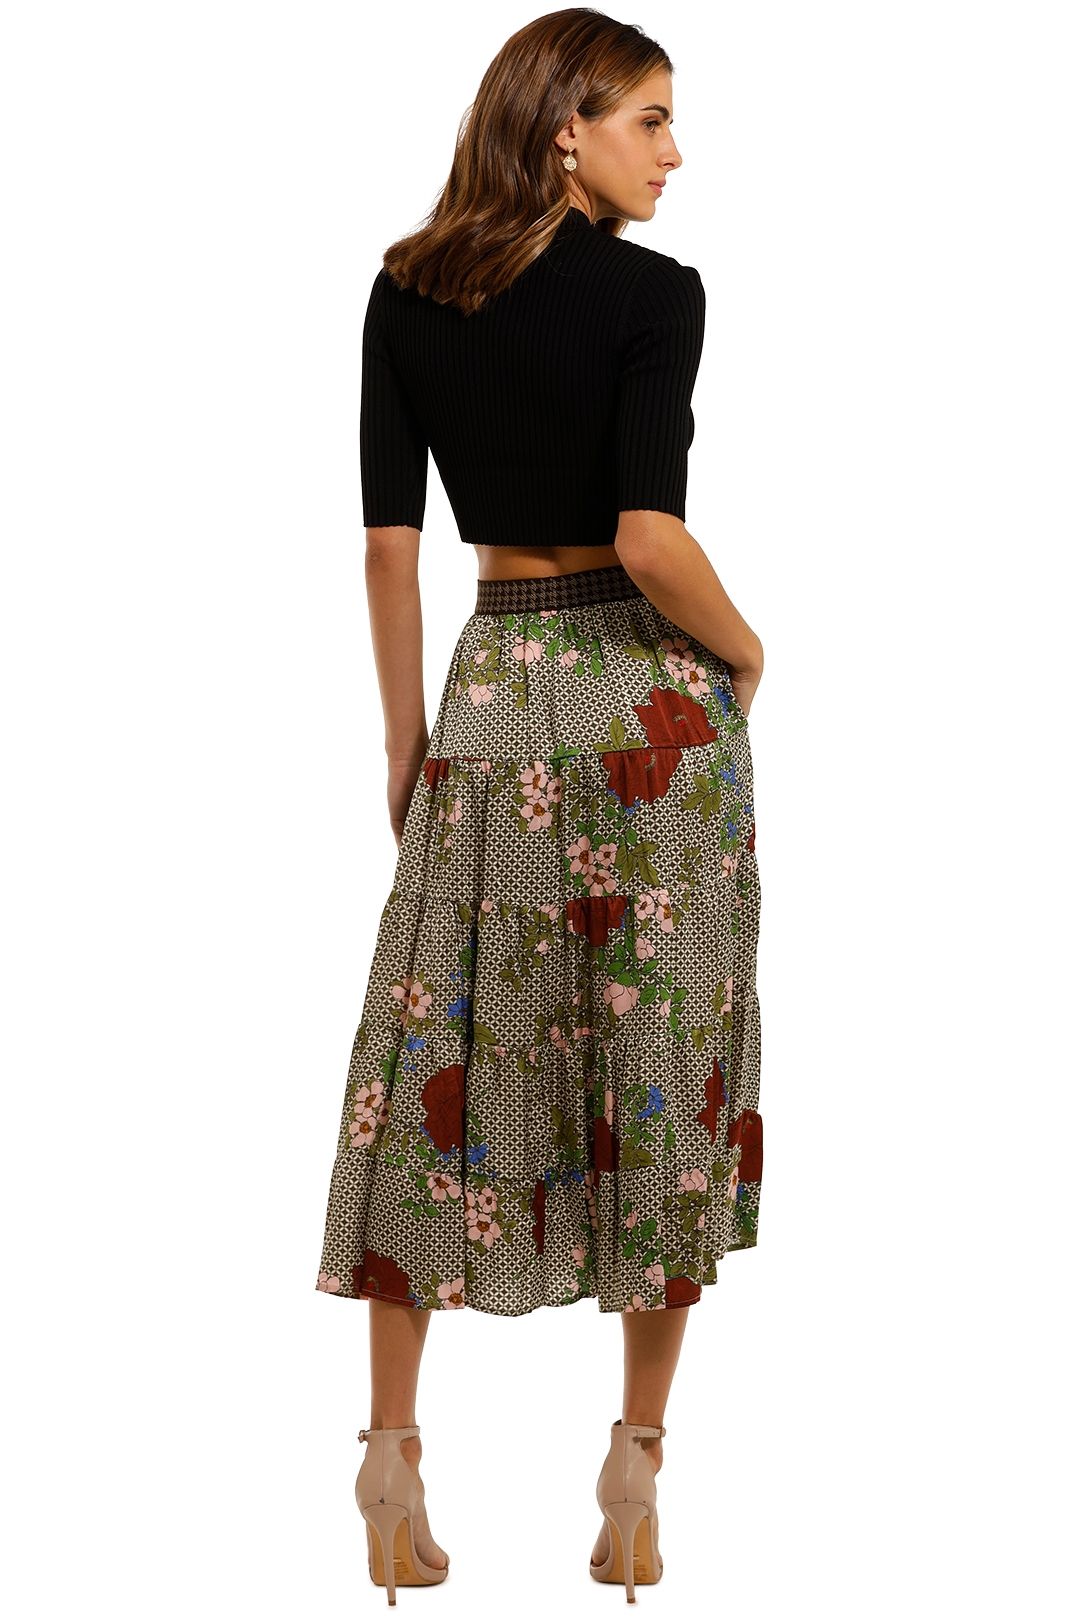 Curate by Trelise Cooper The Last Layer Skirt tiered